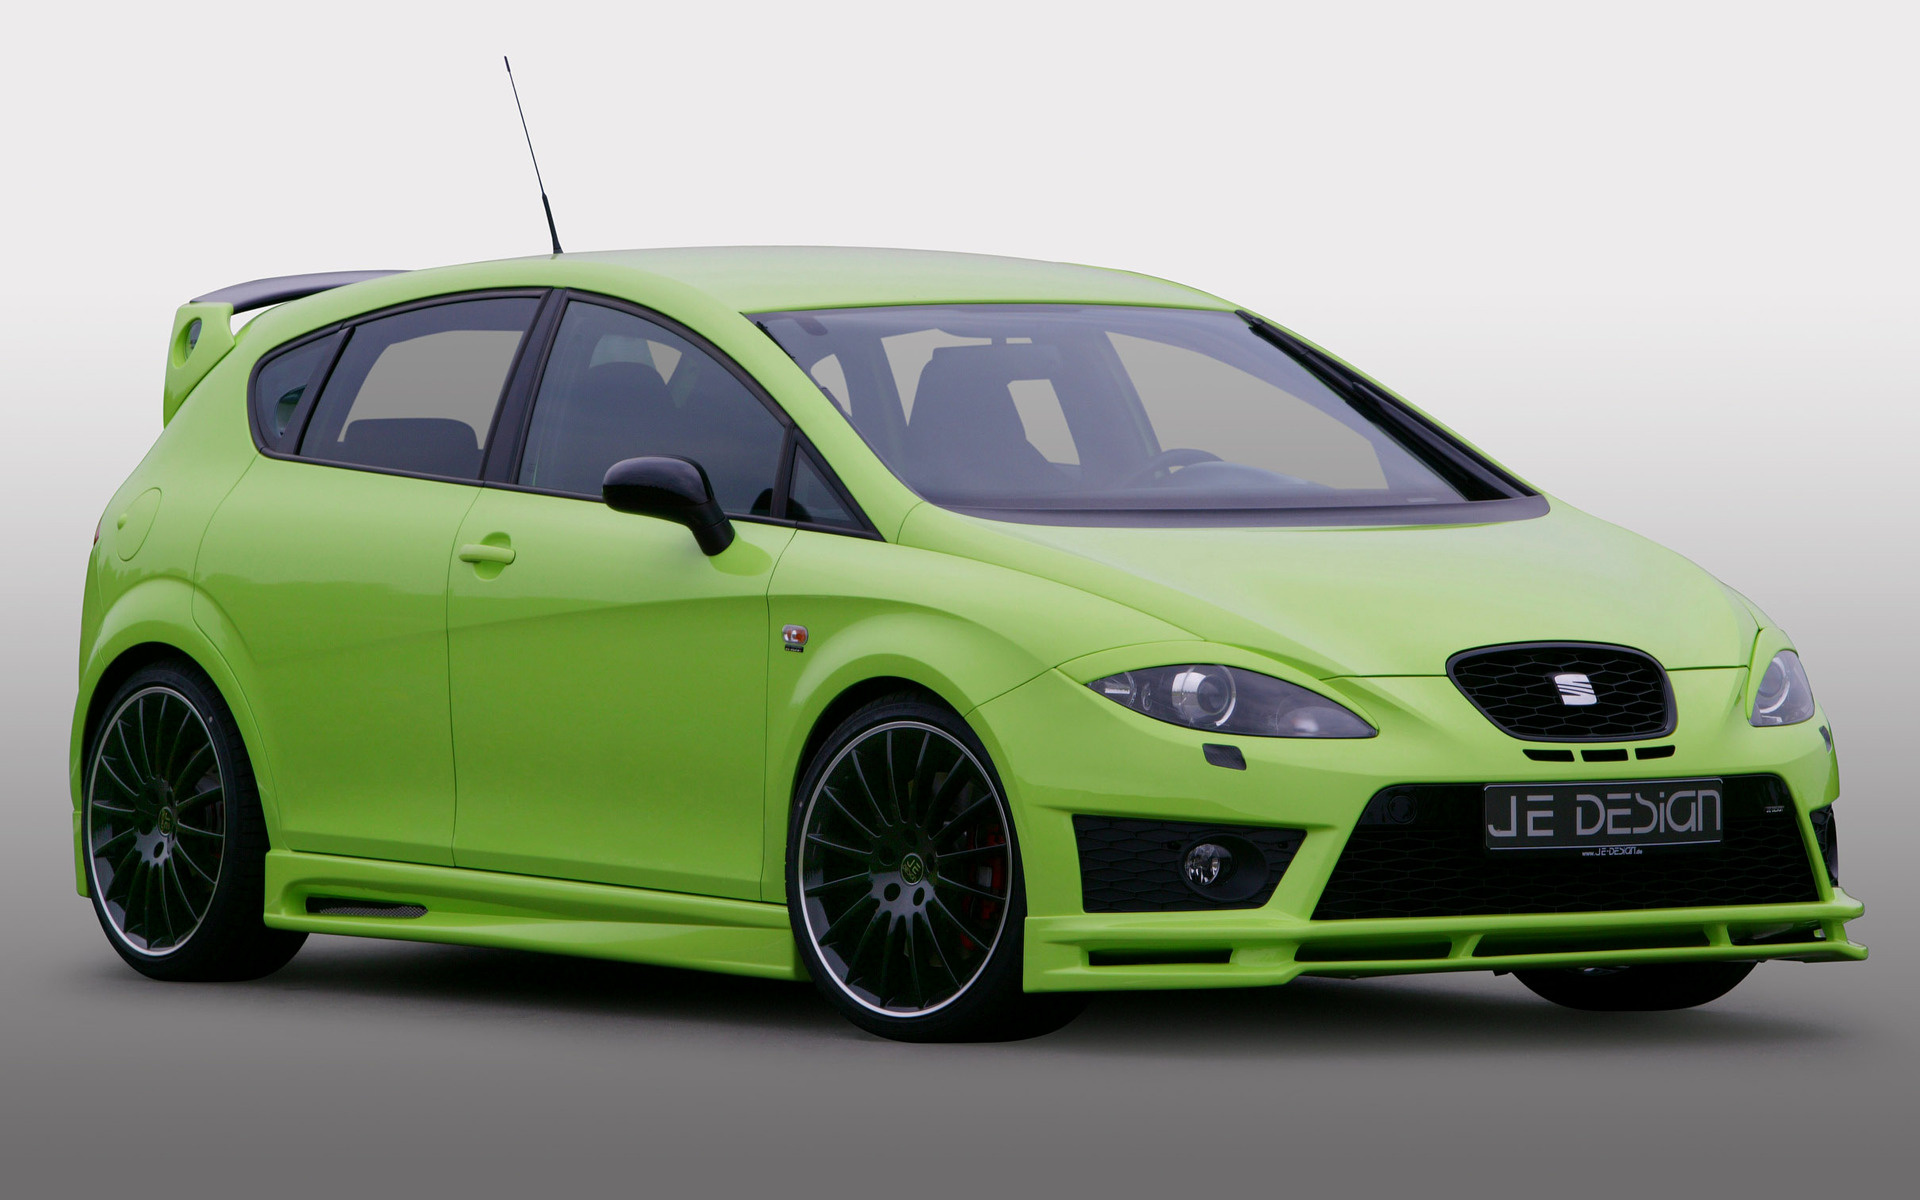 2009 Seat Leon Cupra by JE Design - Wallpapers and HD Images